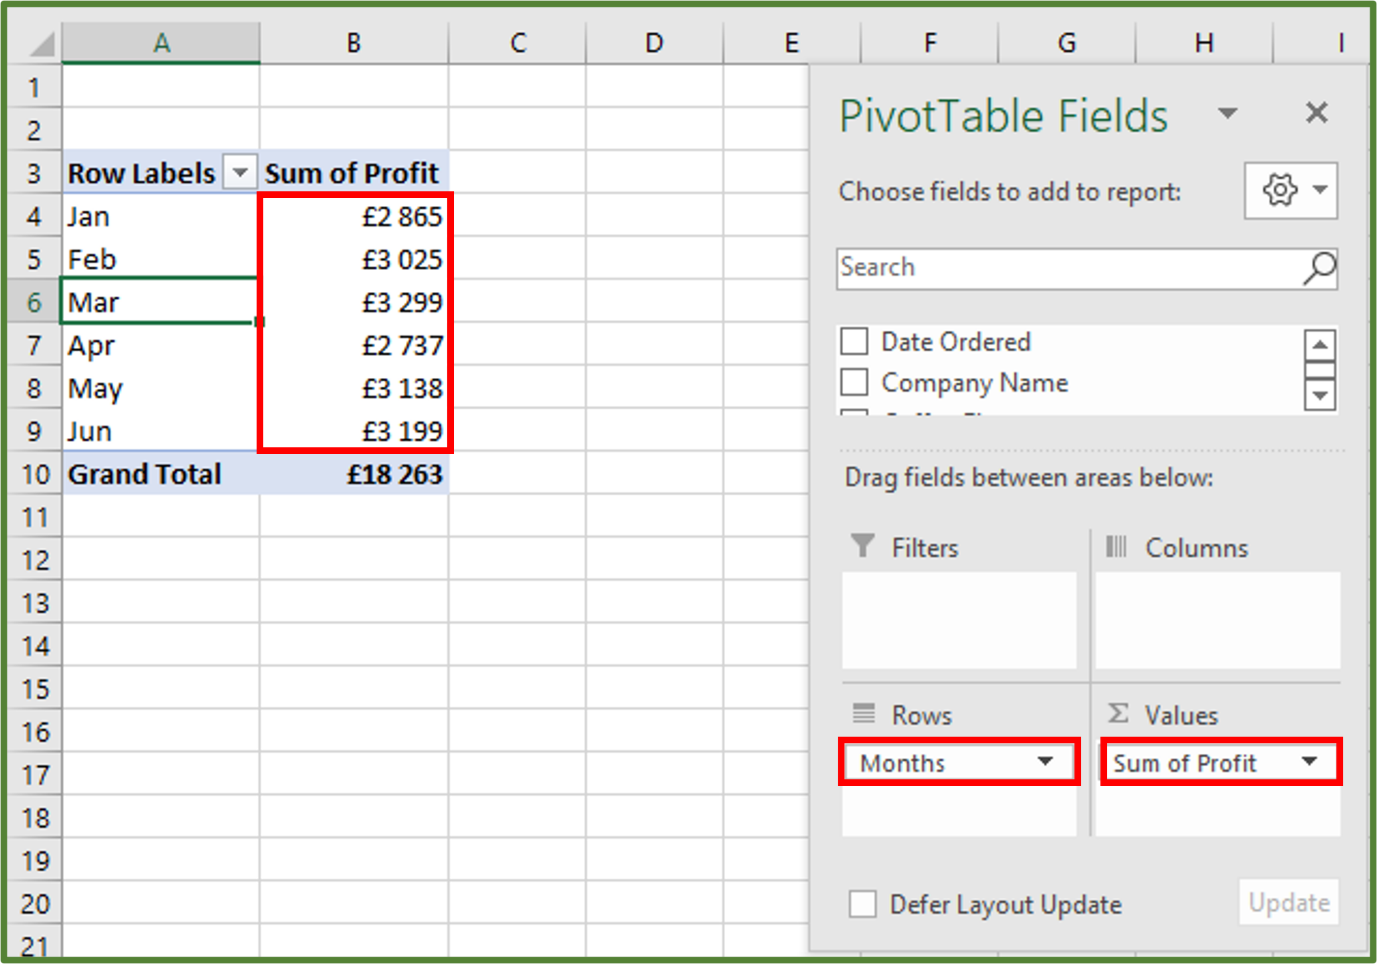 Screenshot showing the Rows, Values and Sum of Profit Column highlighted.